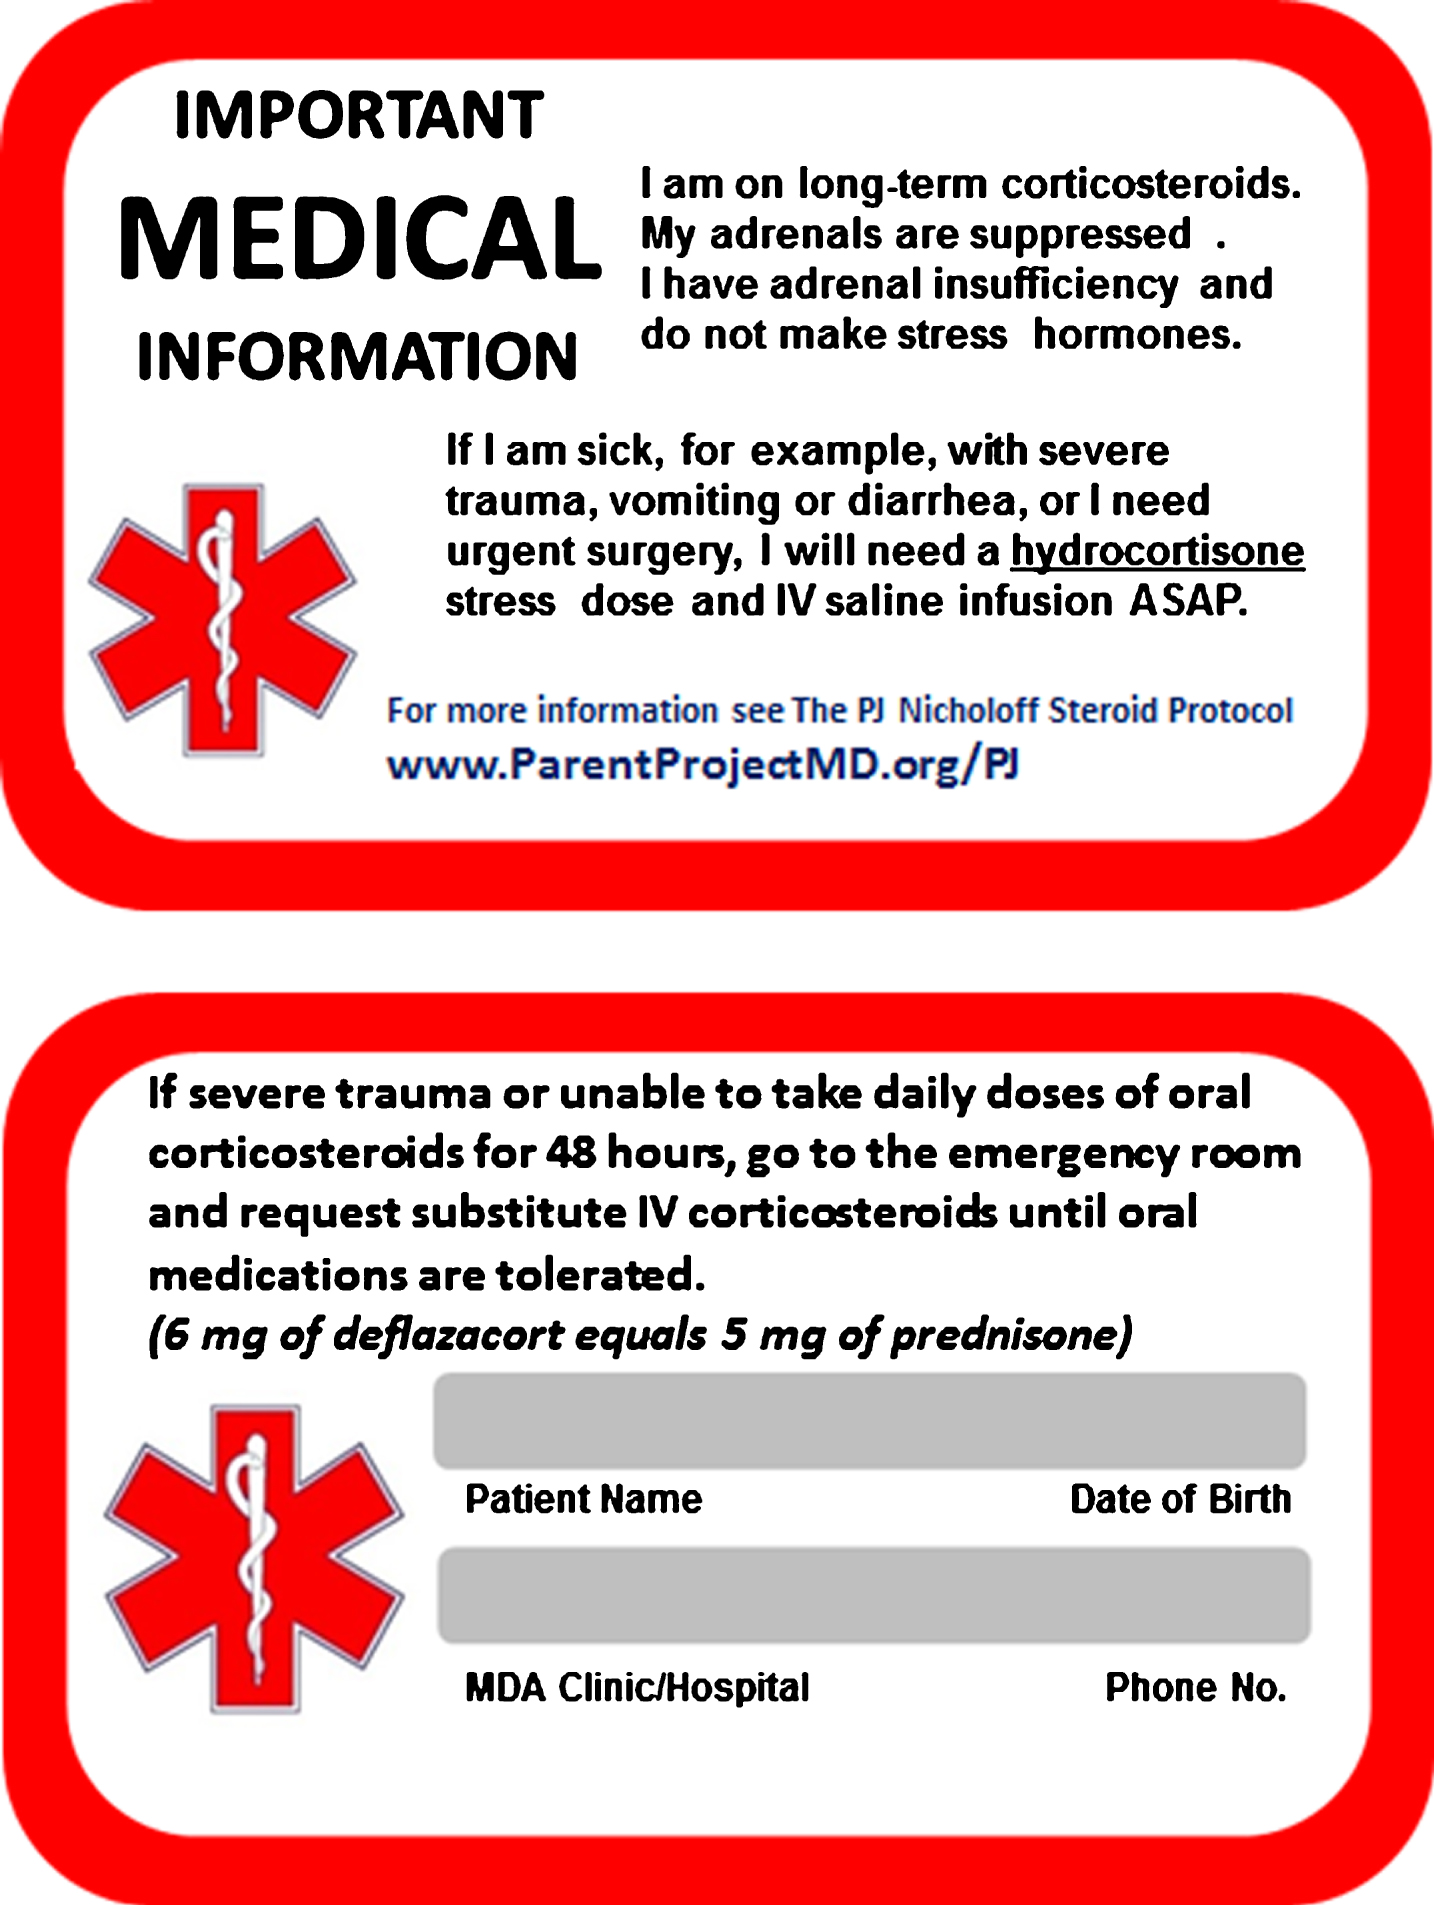 Steroid emergency card, front and back. A complete DMD emergency card that includes all aspect of care for patients with DMD is available at the Parent Project Muscular Dystrophy website [49].